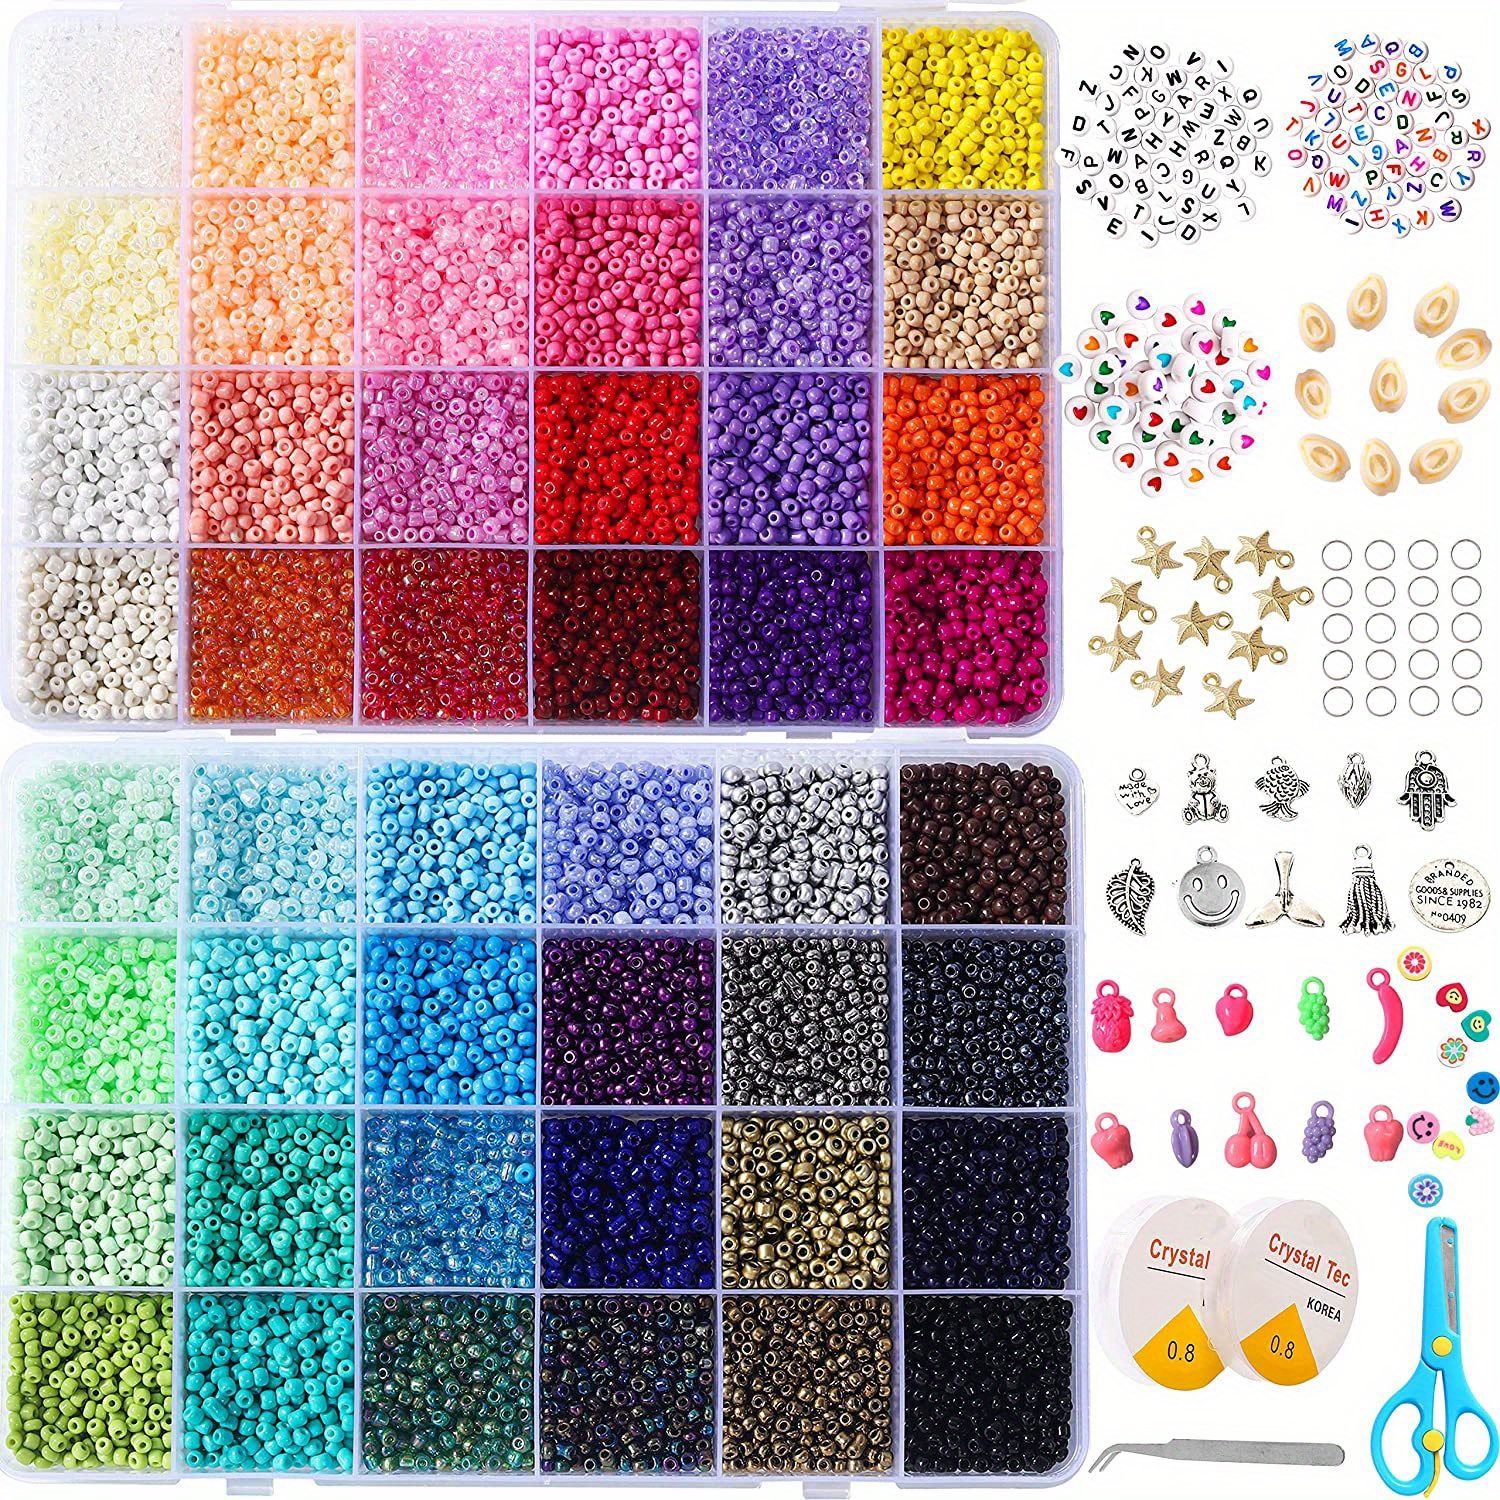 8600 Pcs 4mm 6/0 48 Colors Glass Seed Beads, Charms Bracelet Jewelry Making Beads Kit Gifts Small Craft Glass Beads with Beading Elastic String for